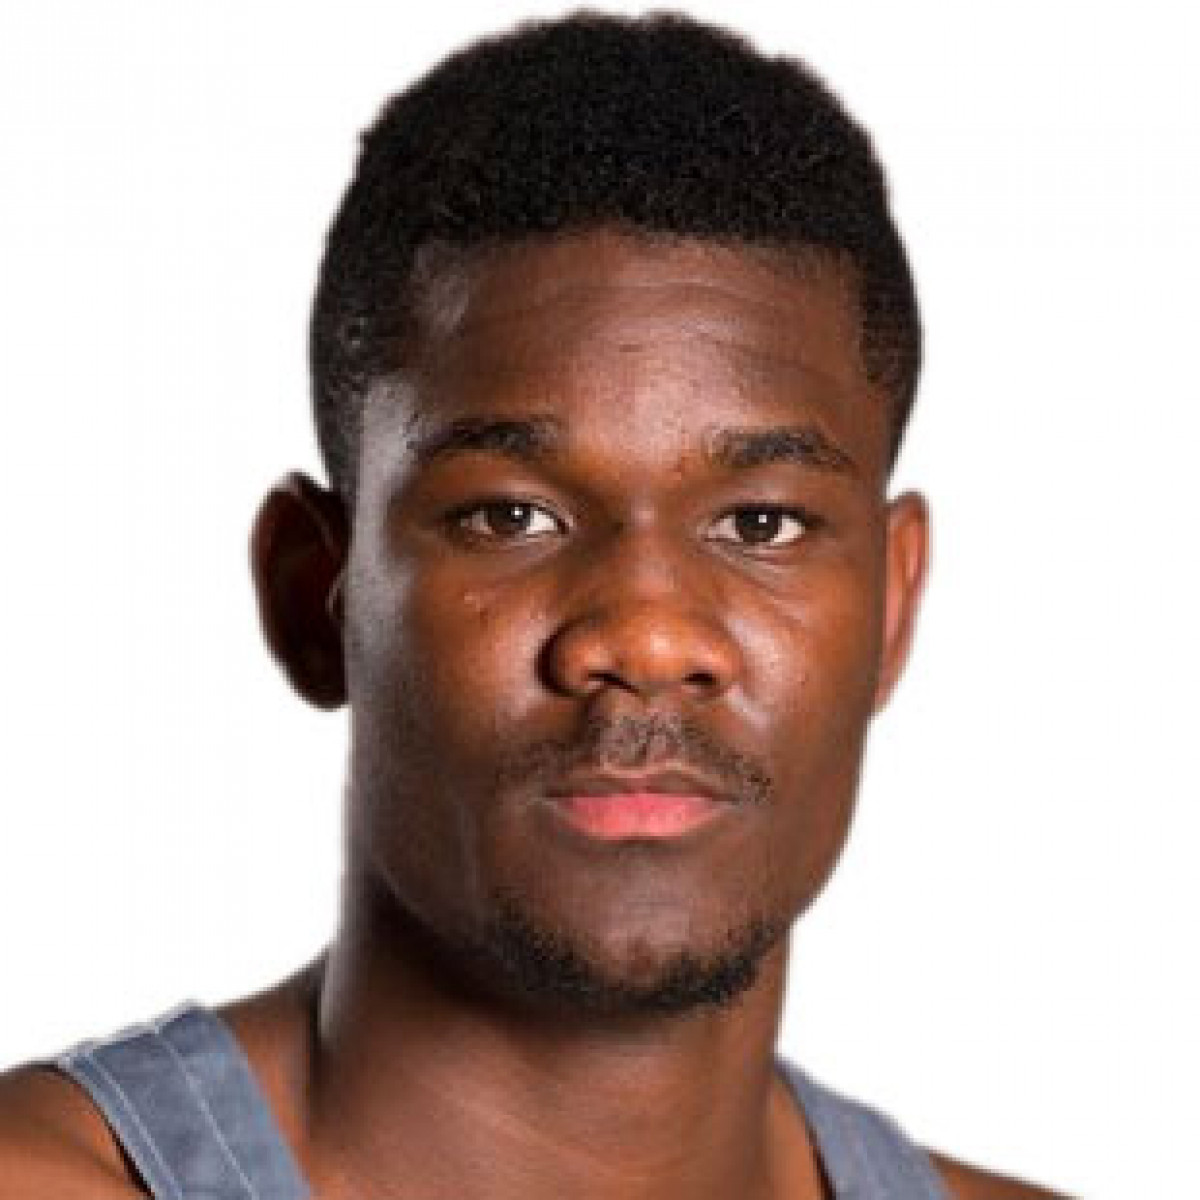 What Are Deandre Ayton's Physical Stats?